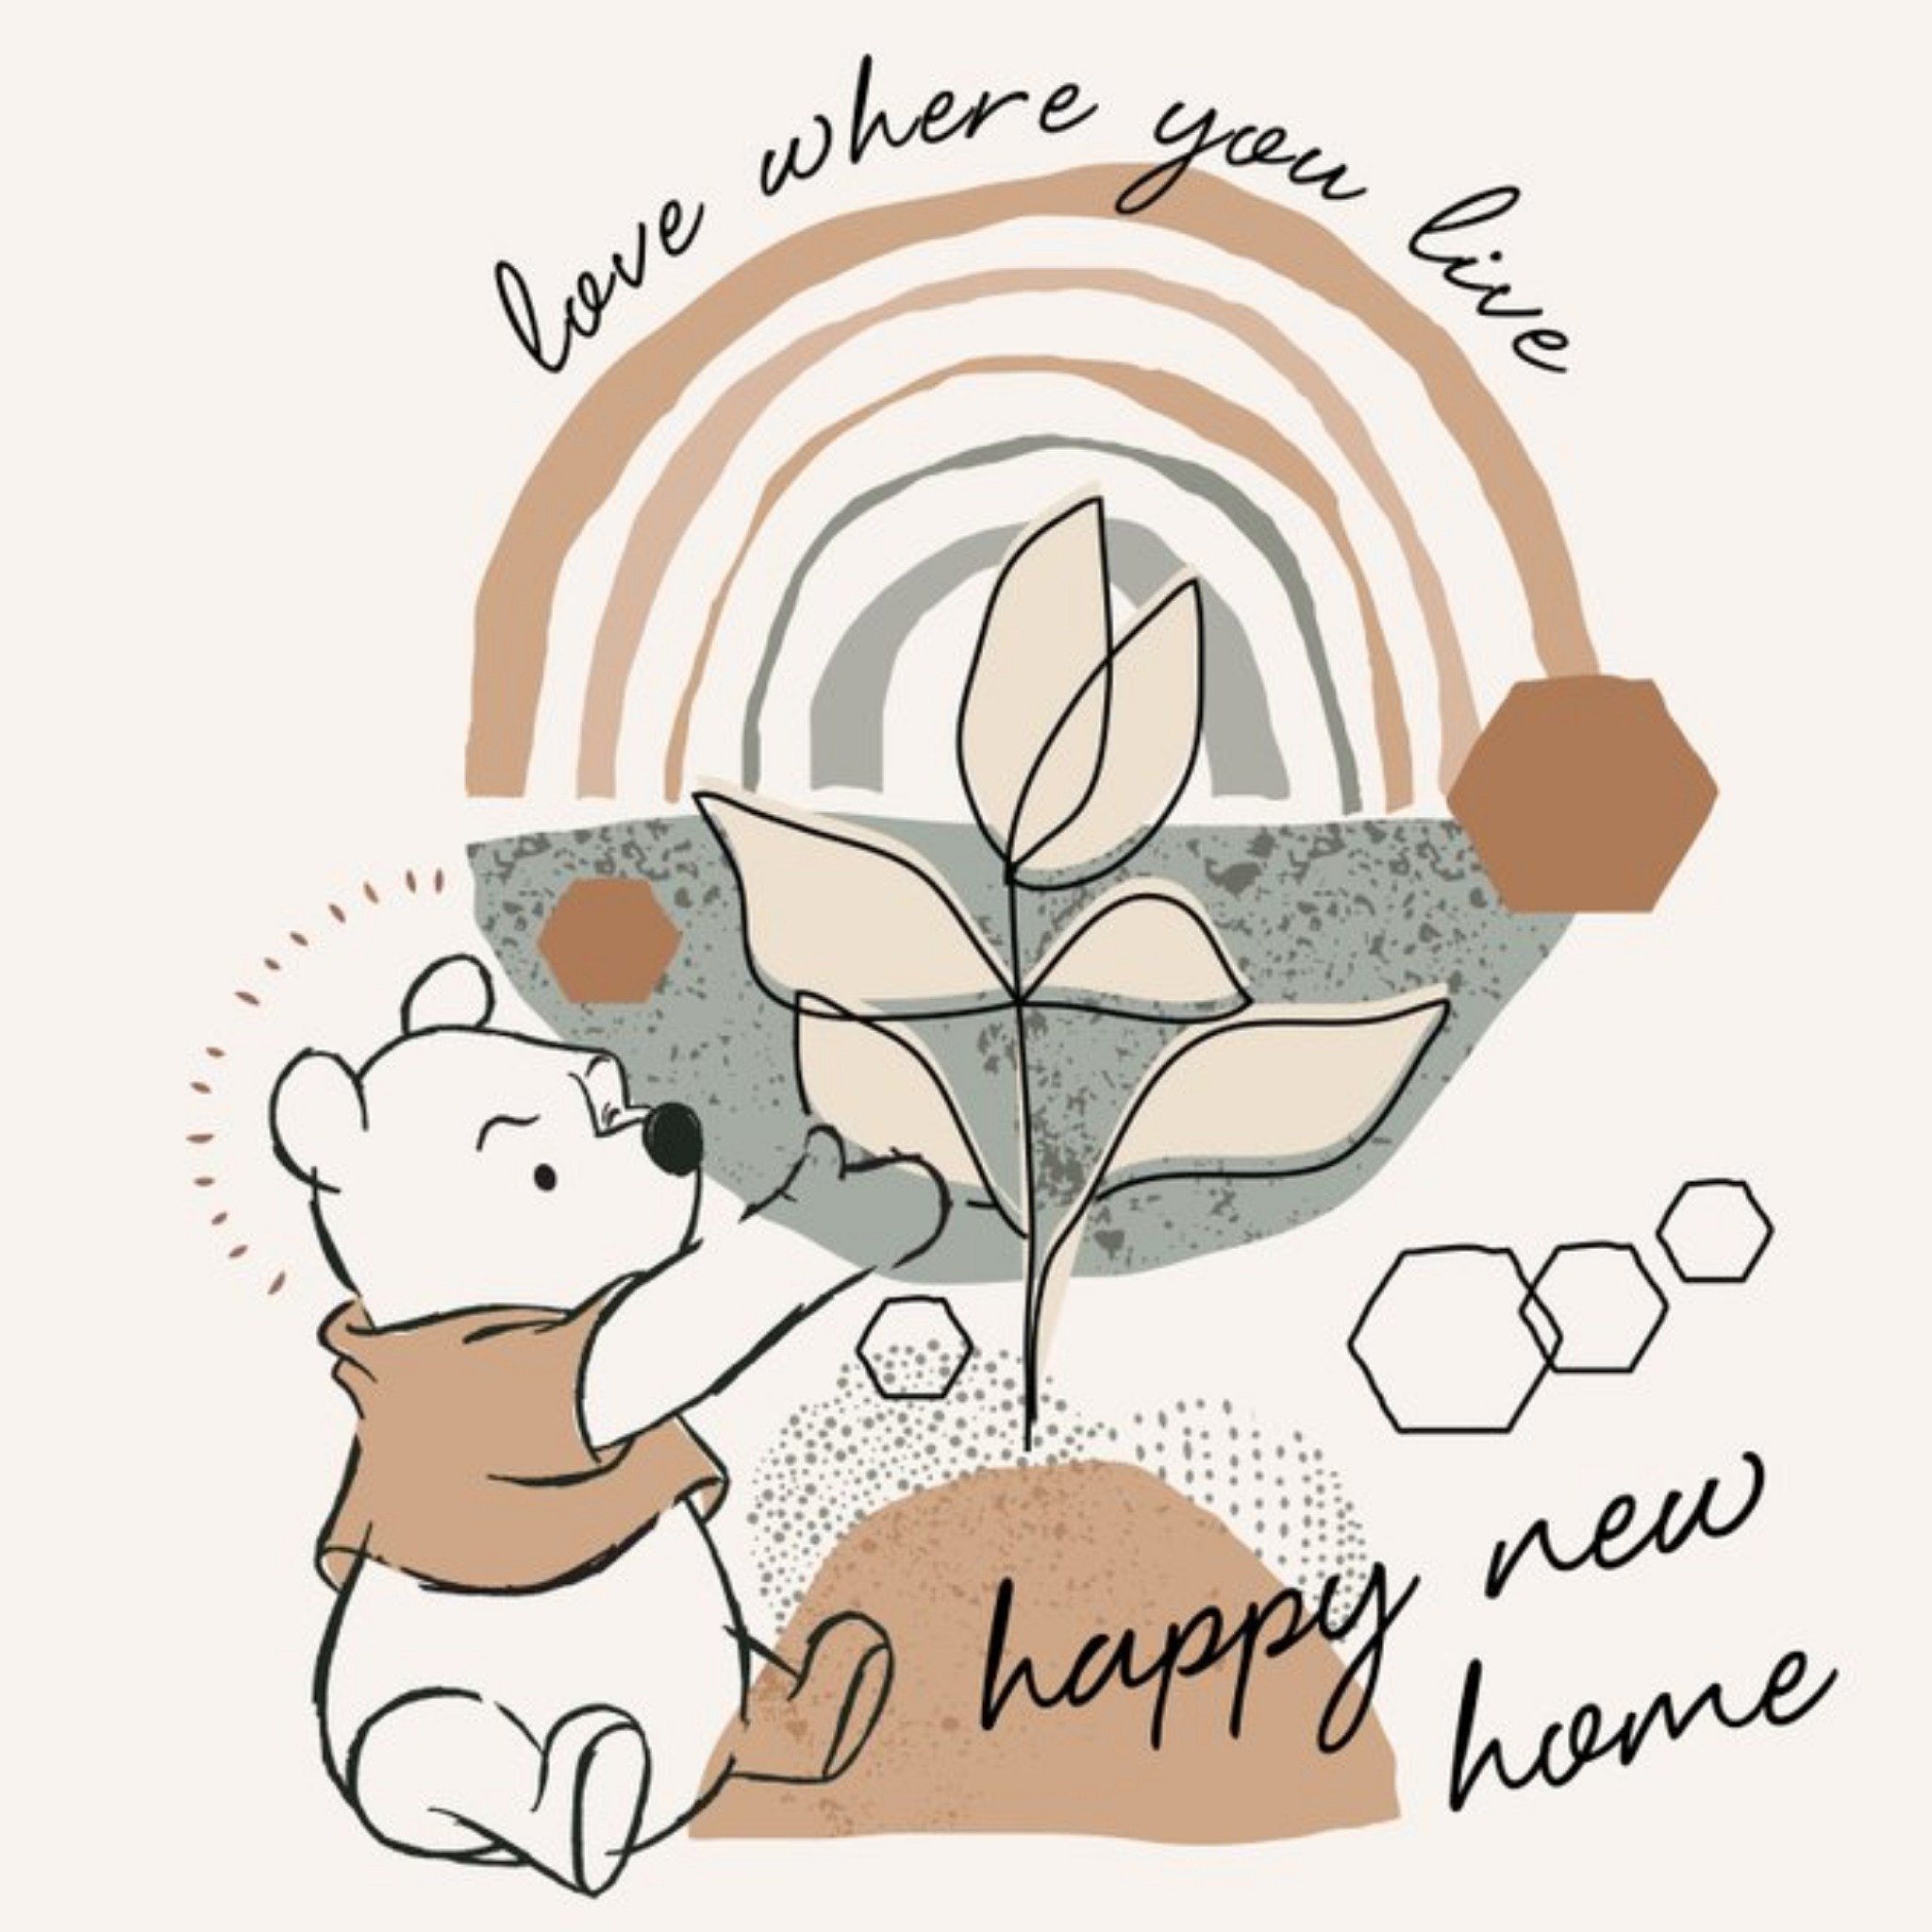 Disney Winnie The Pooh And Piglet Abstract Illustration New Home Card, Square